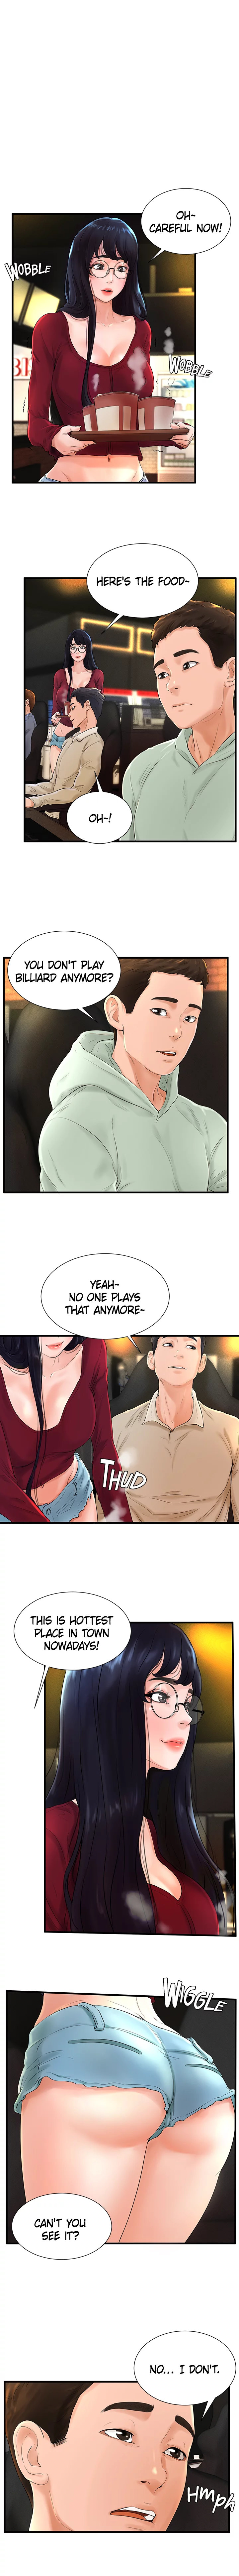 Billiard Room Love - Chapter 7 Page 4